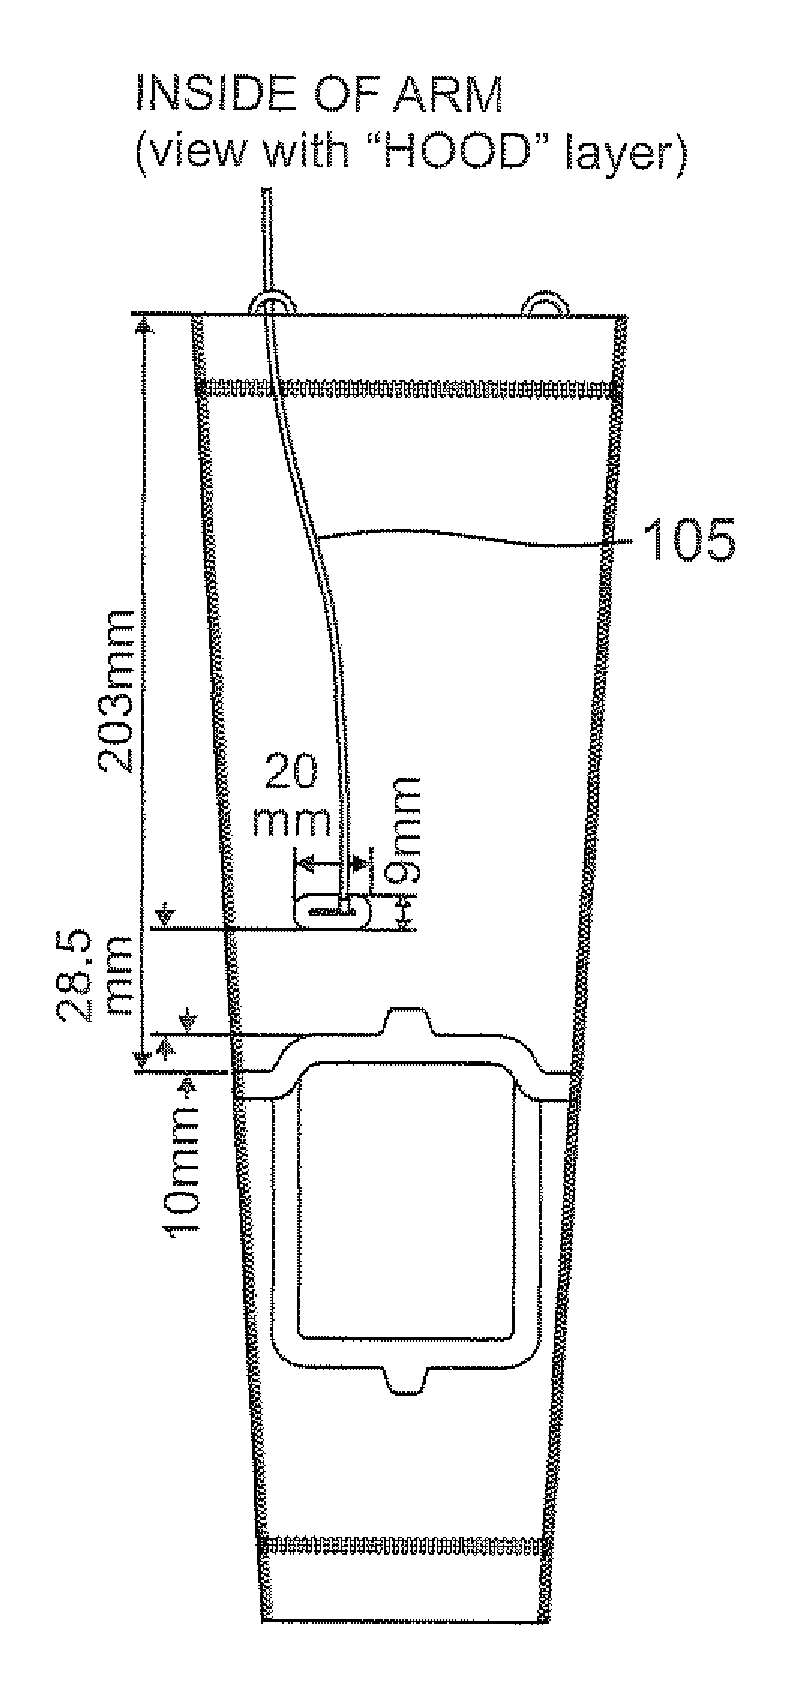 Compression sleeve for retaining electronic devices in an operable format while an individual is wearing the sleeve and engaging in physical activities